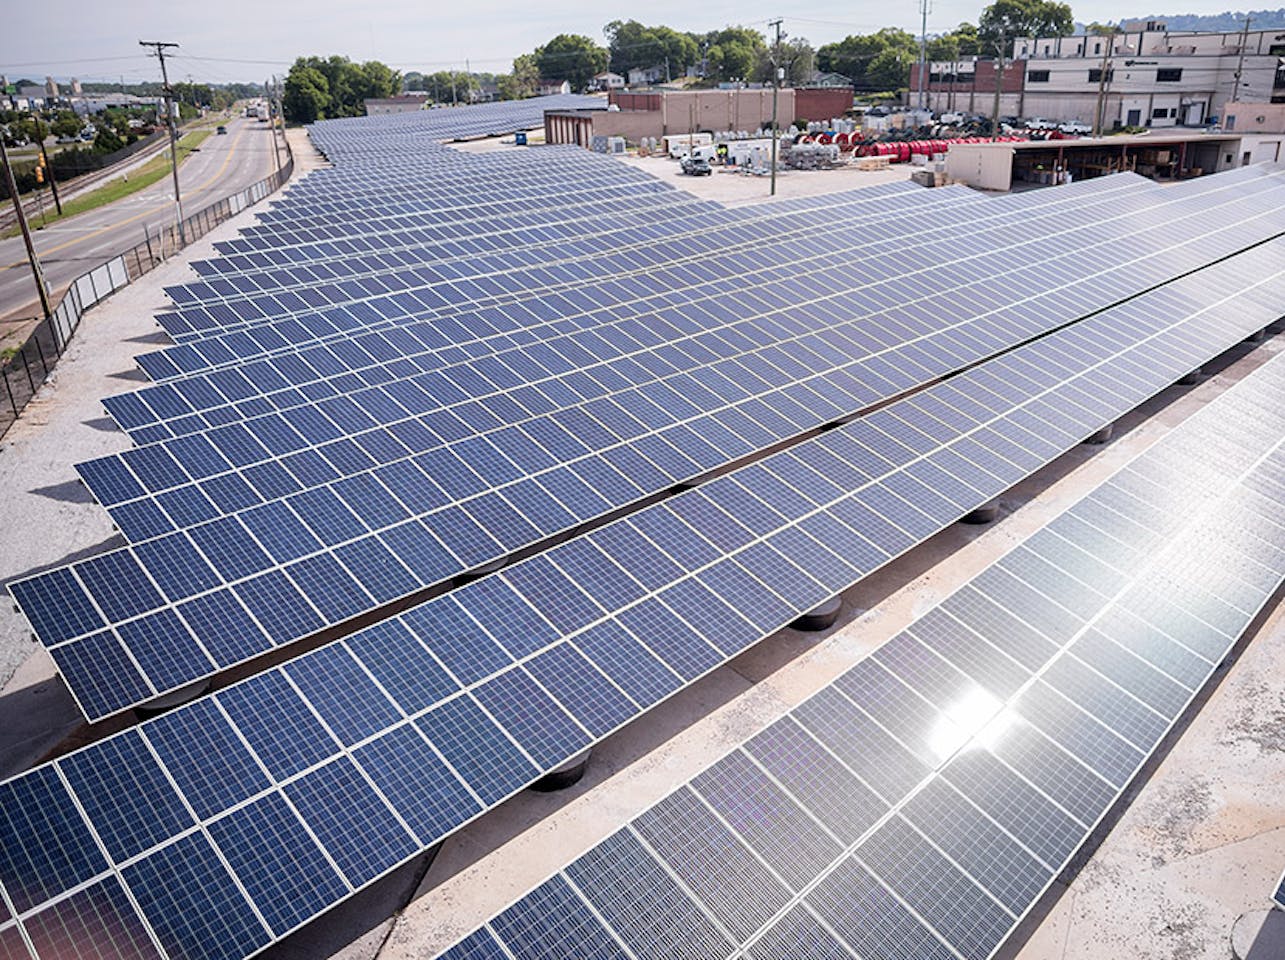 Get solar power in Chattanooga